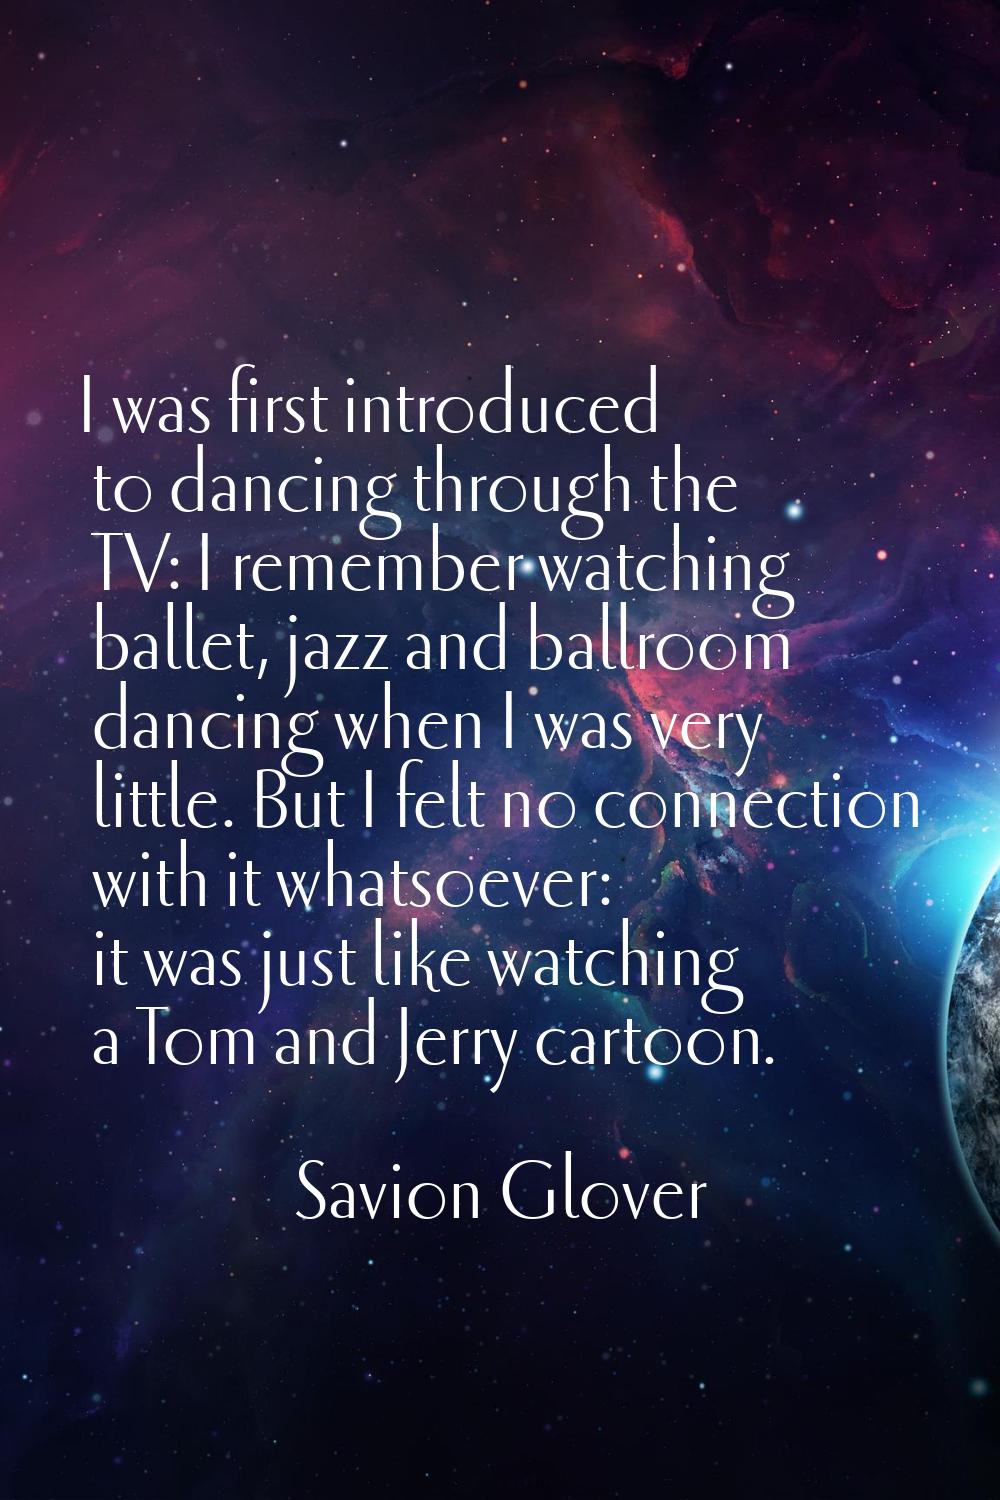 I was first introduced to dancing through the TV: I remember watching ballet, jazz and ballroom dan